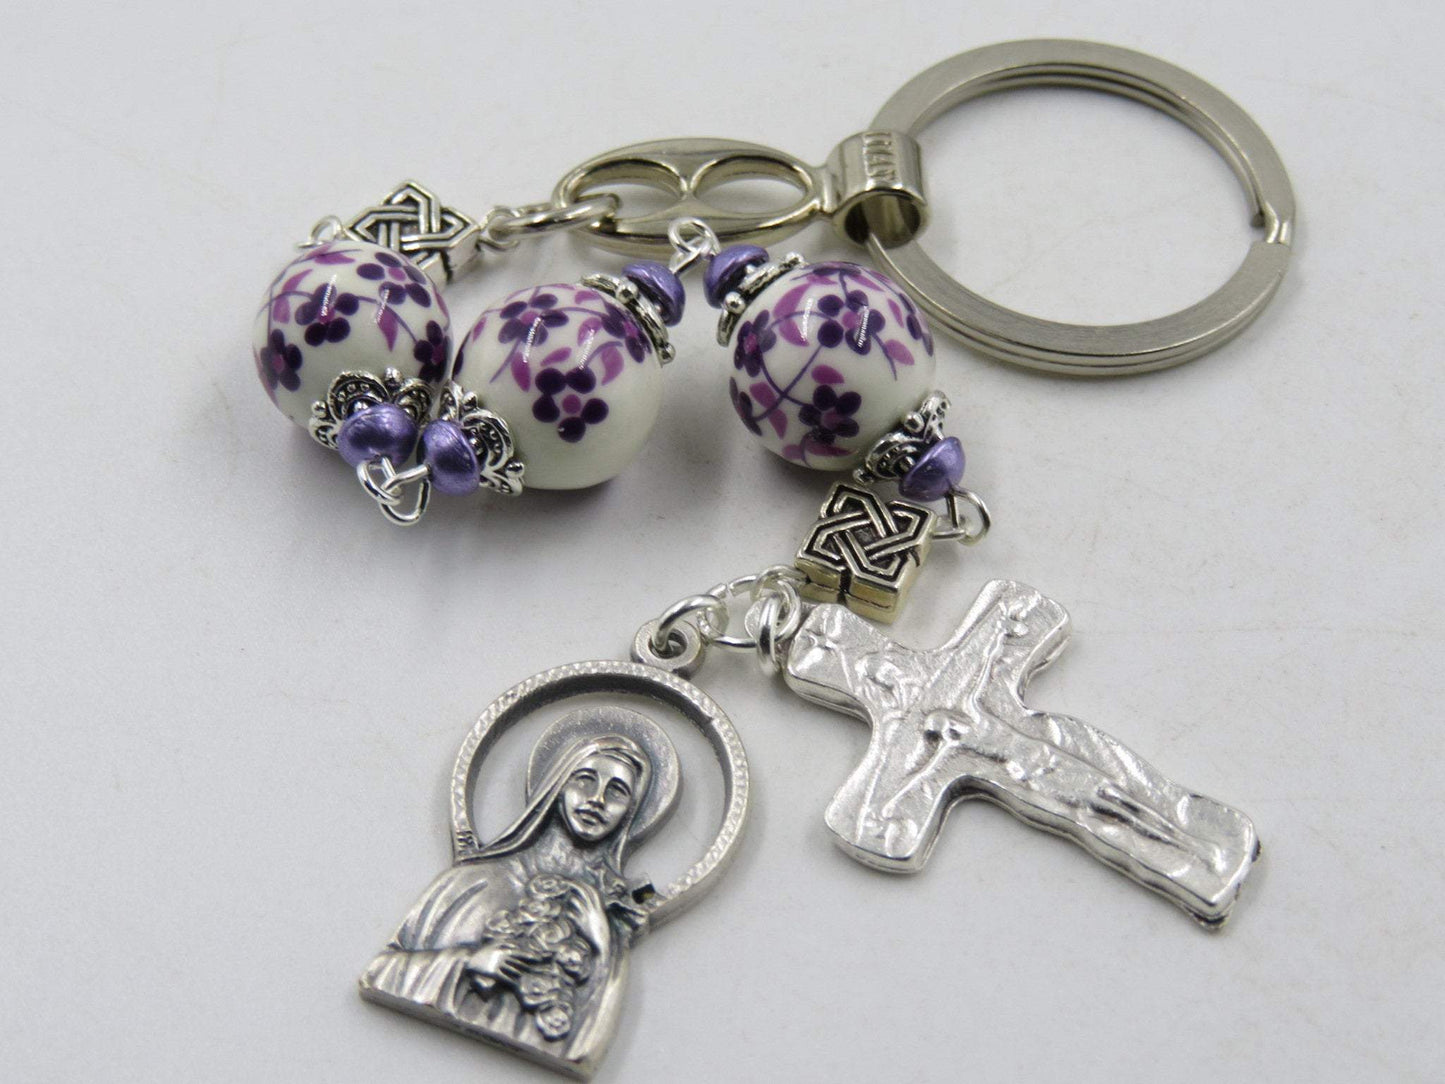 Three Hail Mary devotional chaplet beads, St Therese of Lisieux Religious medal, Three Hail Mary bead, prayer beads, Ave Maria beads.